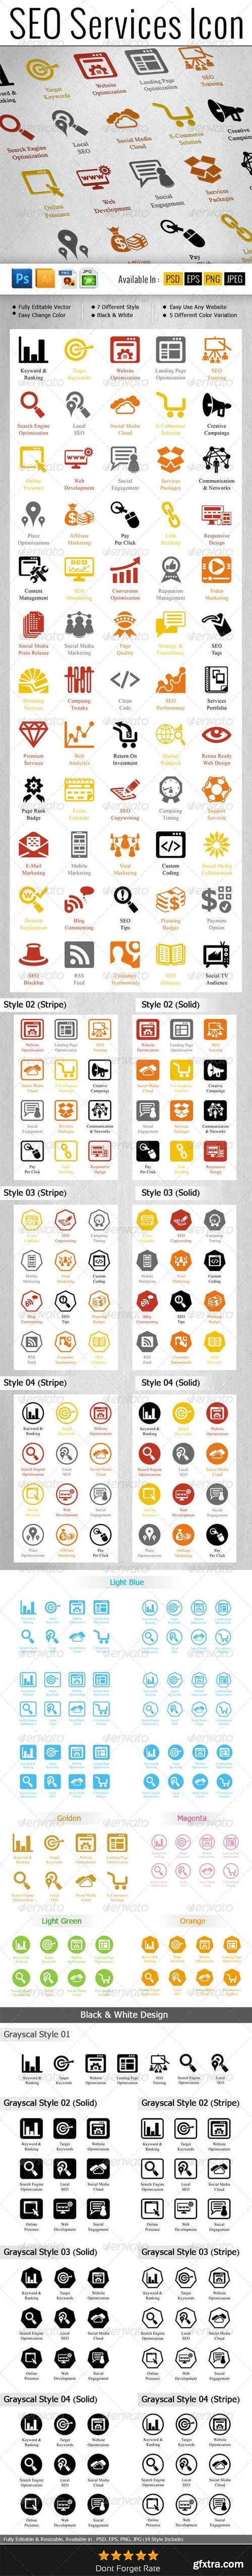 GraphicRiver - SEO Services Icons Pack - 6519629